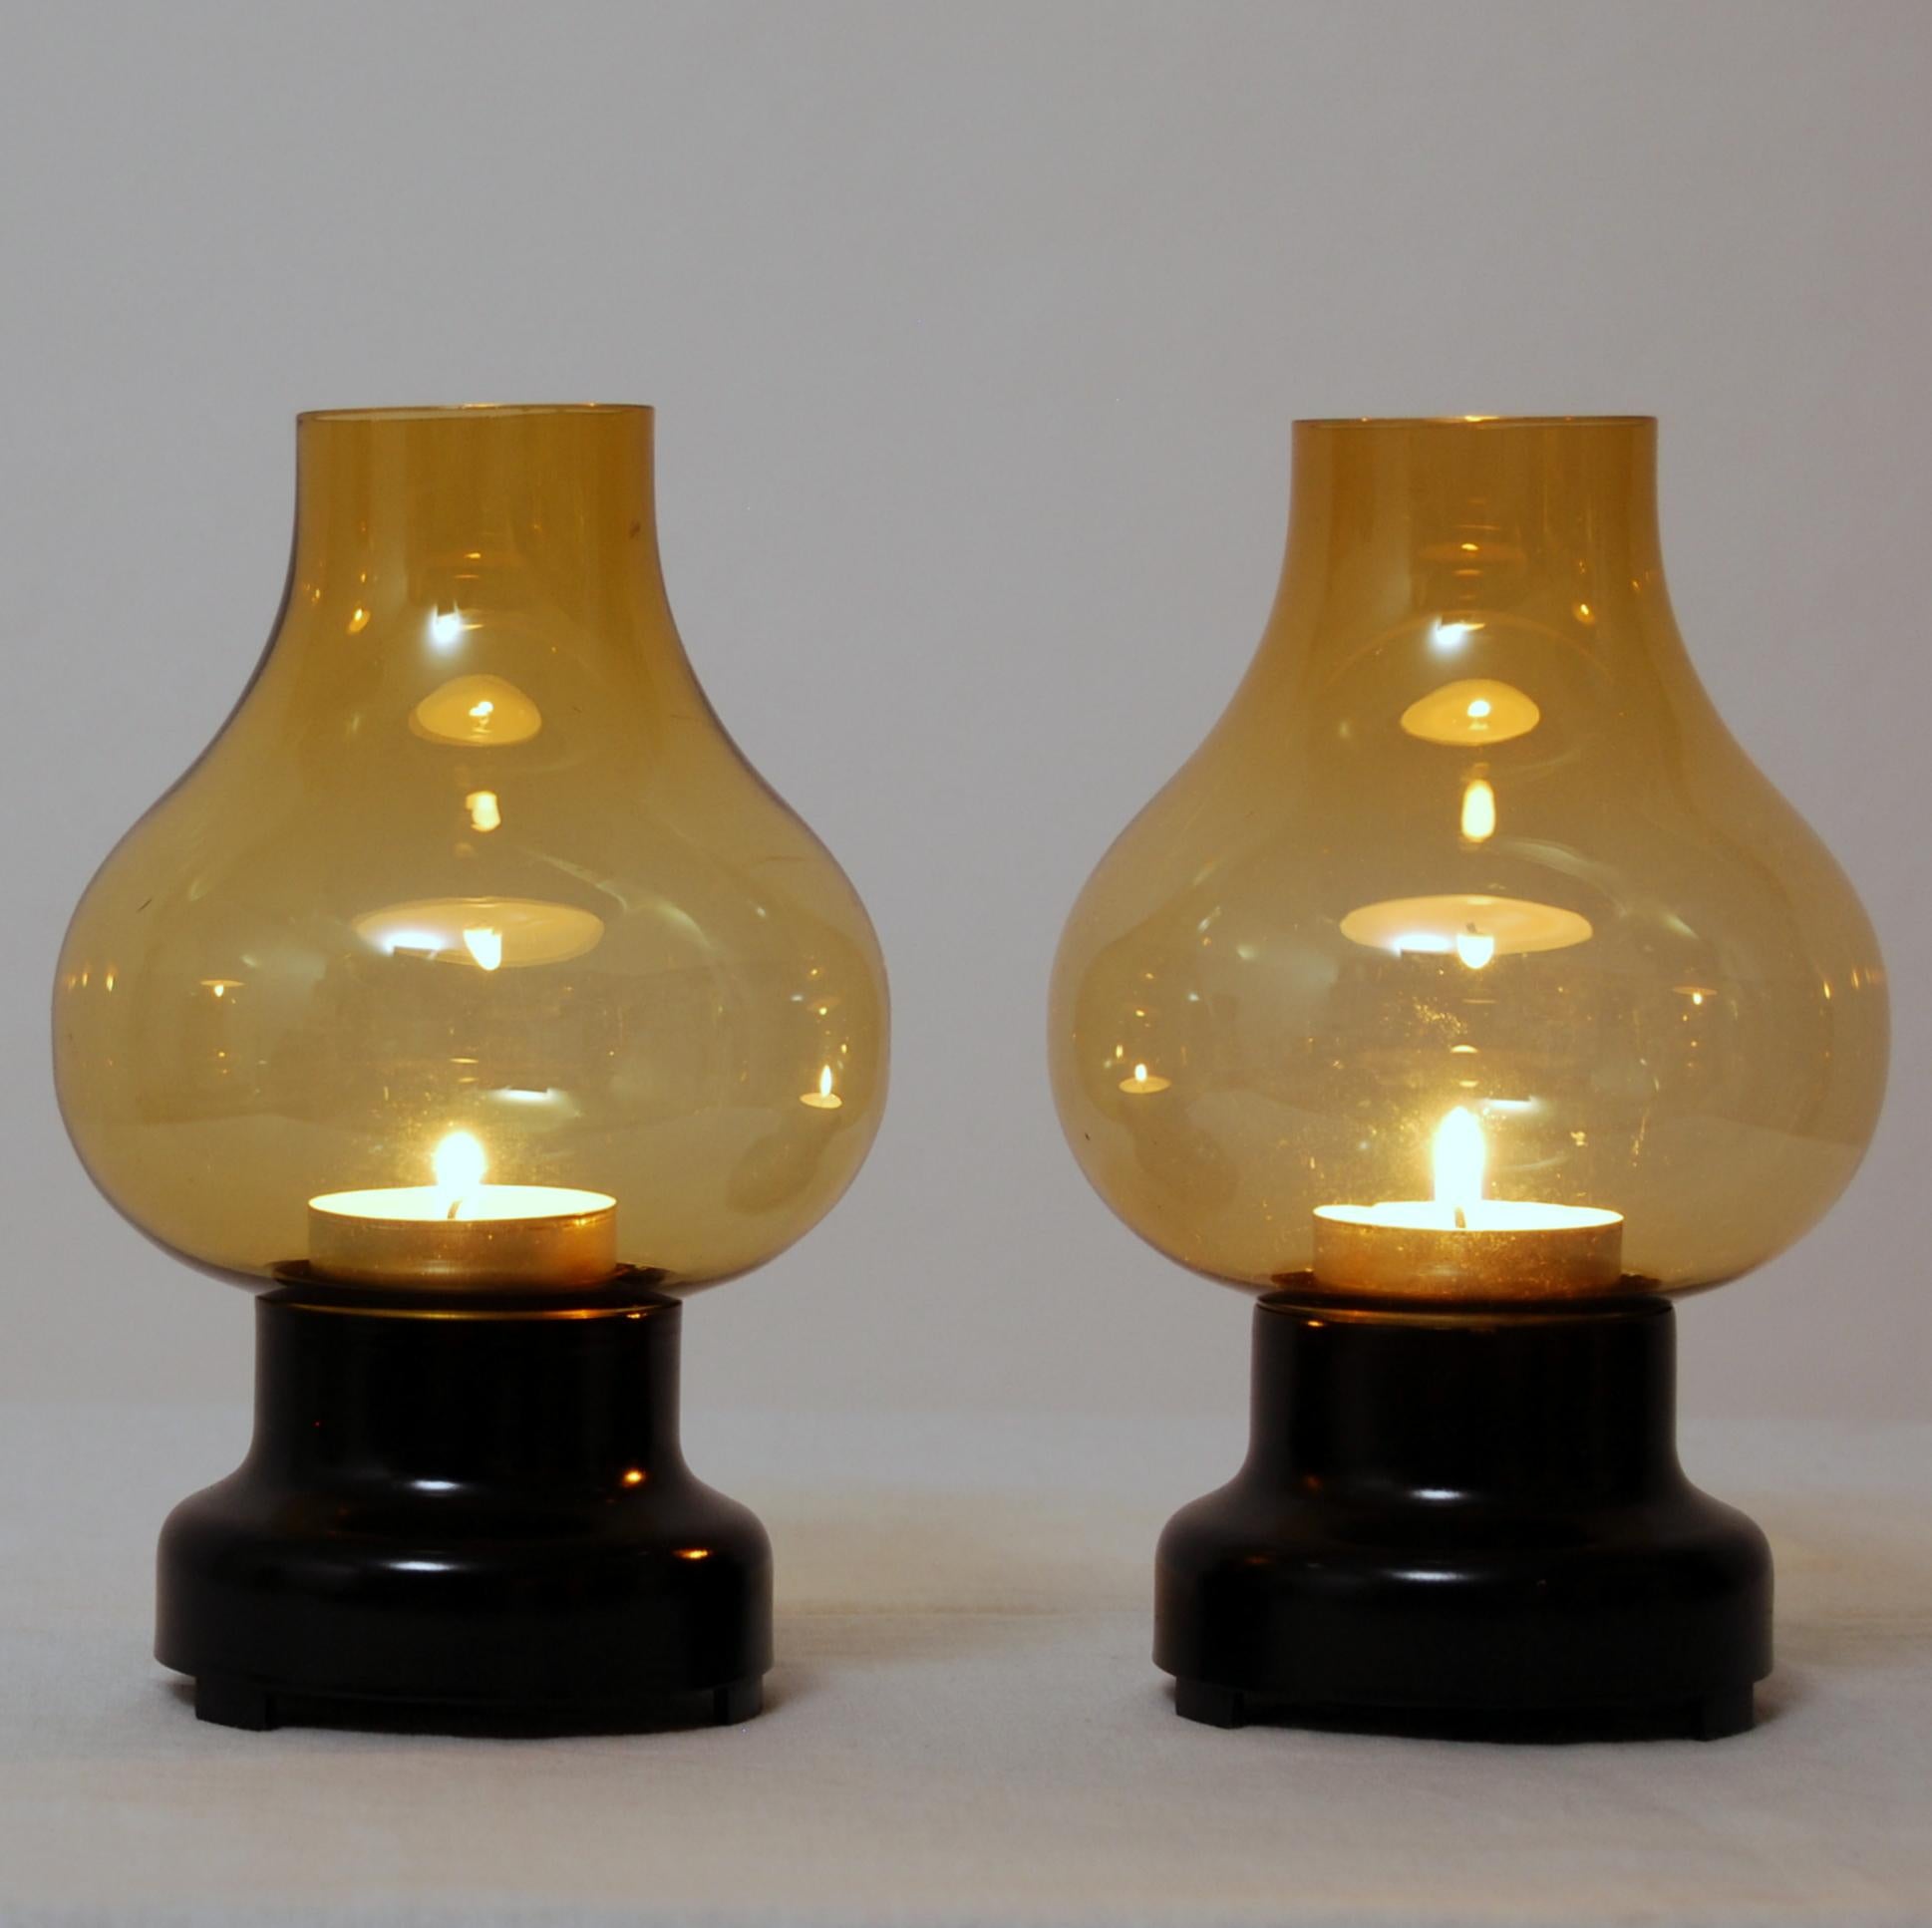 The Ofir candleholders from Ateljé Lyktan was designed by Hans Bergström in 1958. Hans Bergström has designed many Classic pieces for Ateljé Lyktan and Ofir is one of them.
 